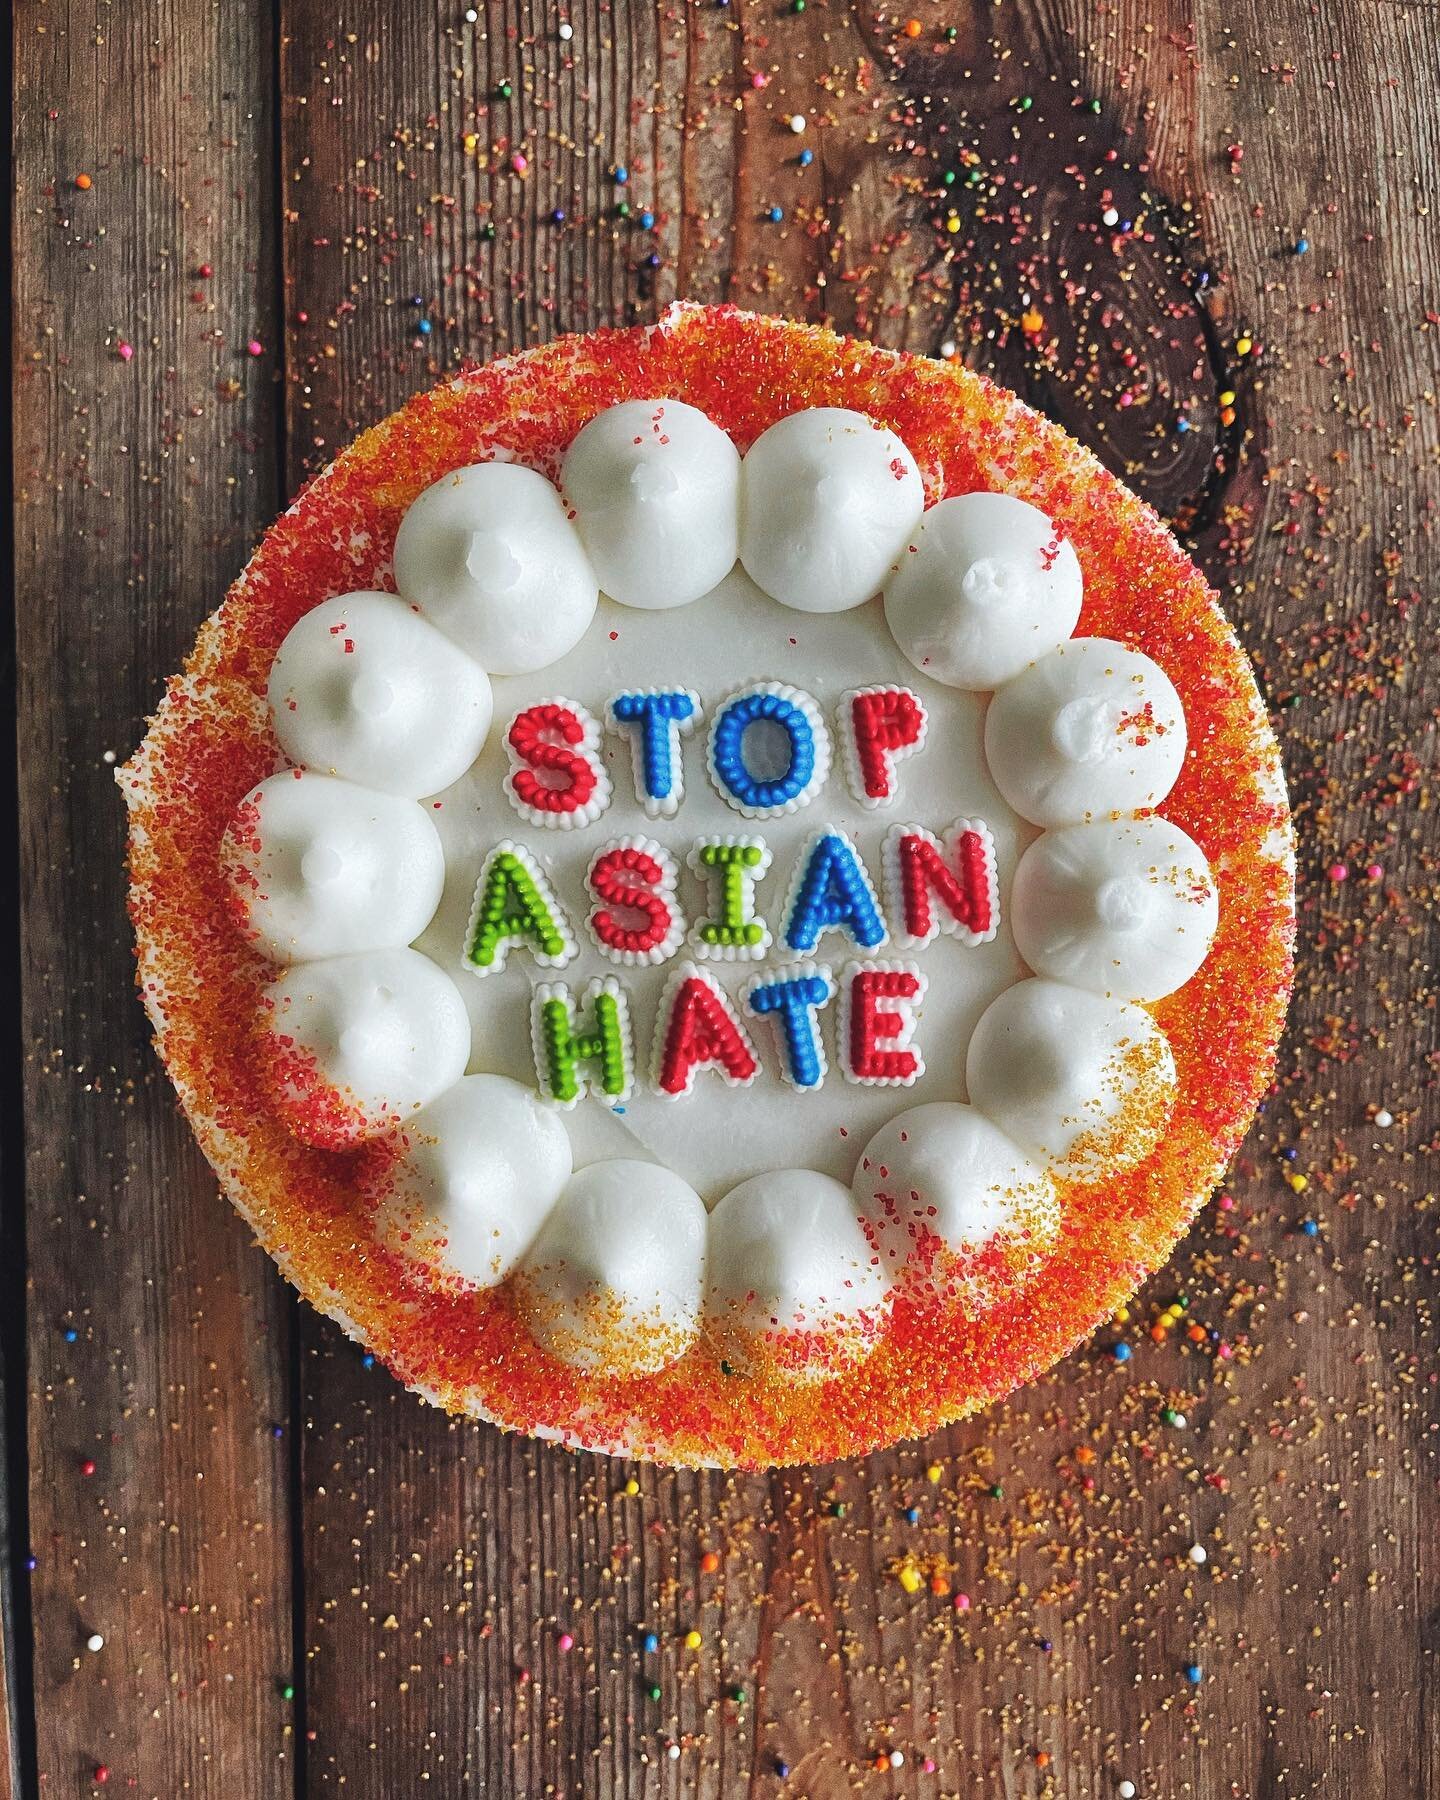 And once again, 🖕🏽 white supremacy. Link to donate to the AAPI community fund is in my bio. Thank you to @whyyoubakedough for the inspiration behind this cake. ❤️ #stopasianhate